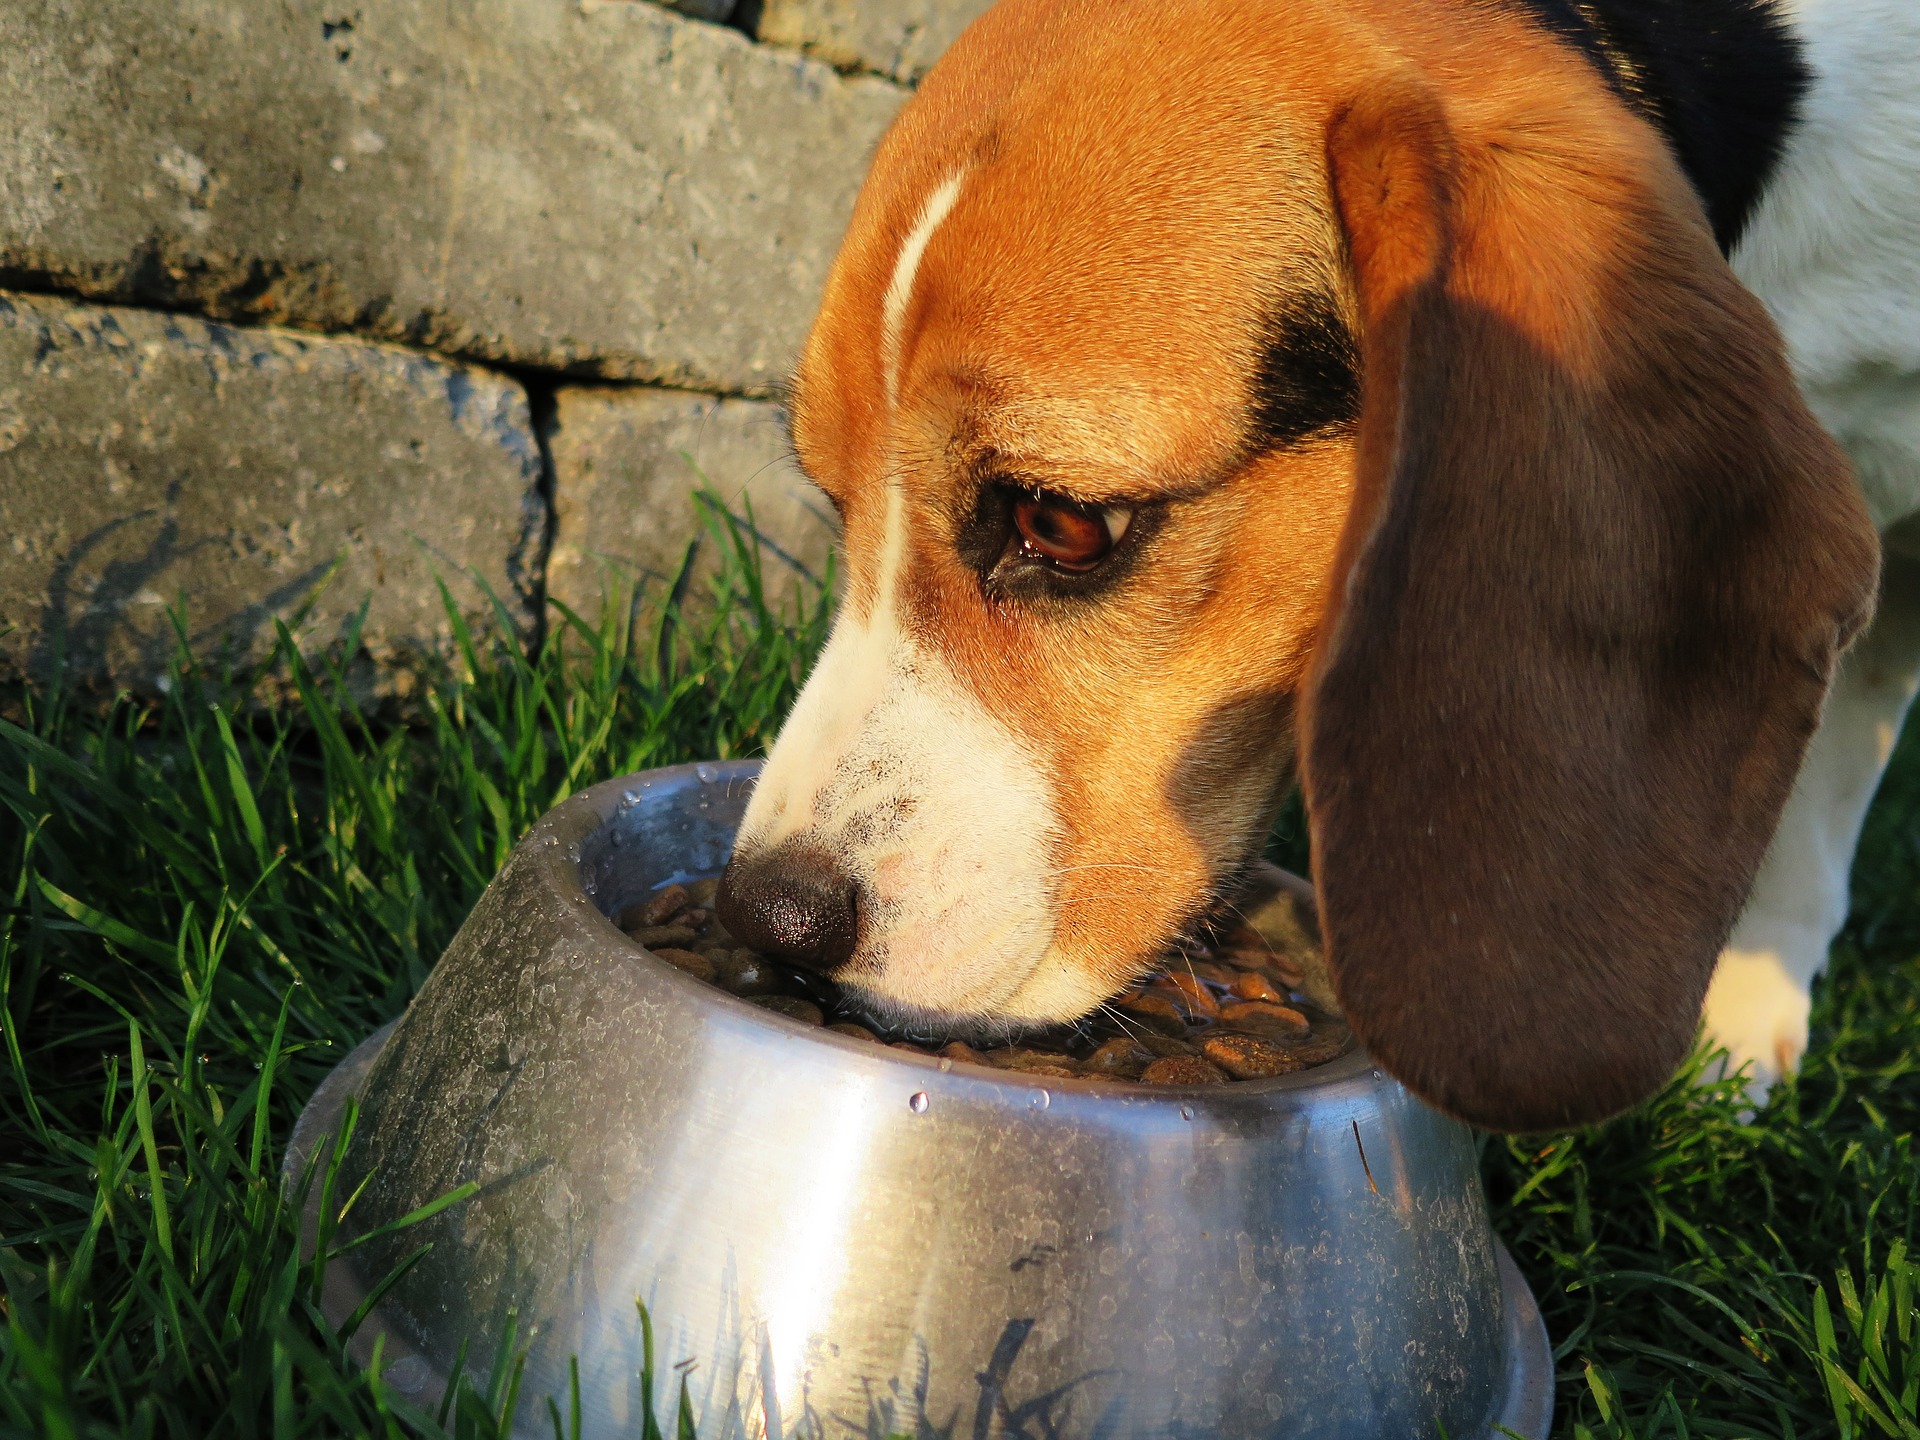 Transitioning Your Dog to a New Food